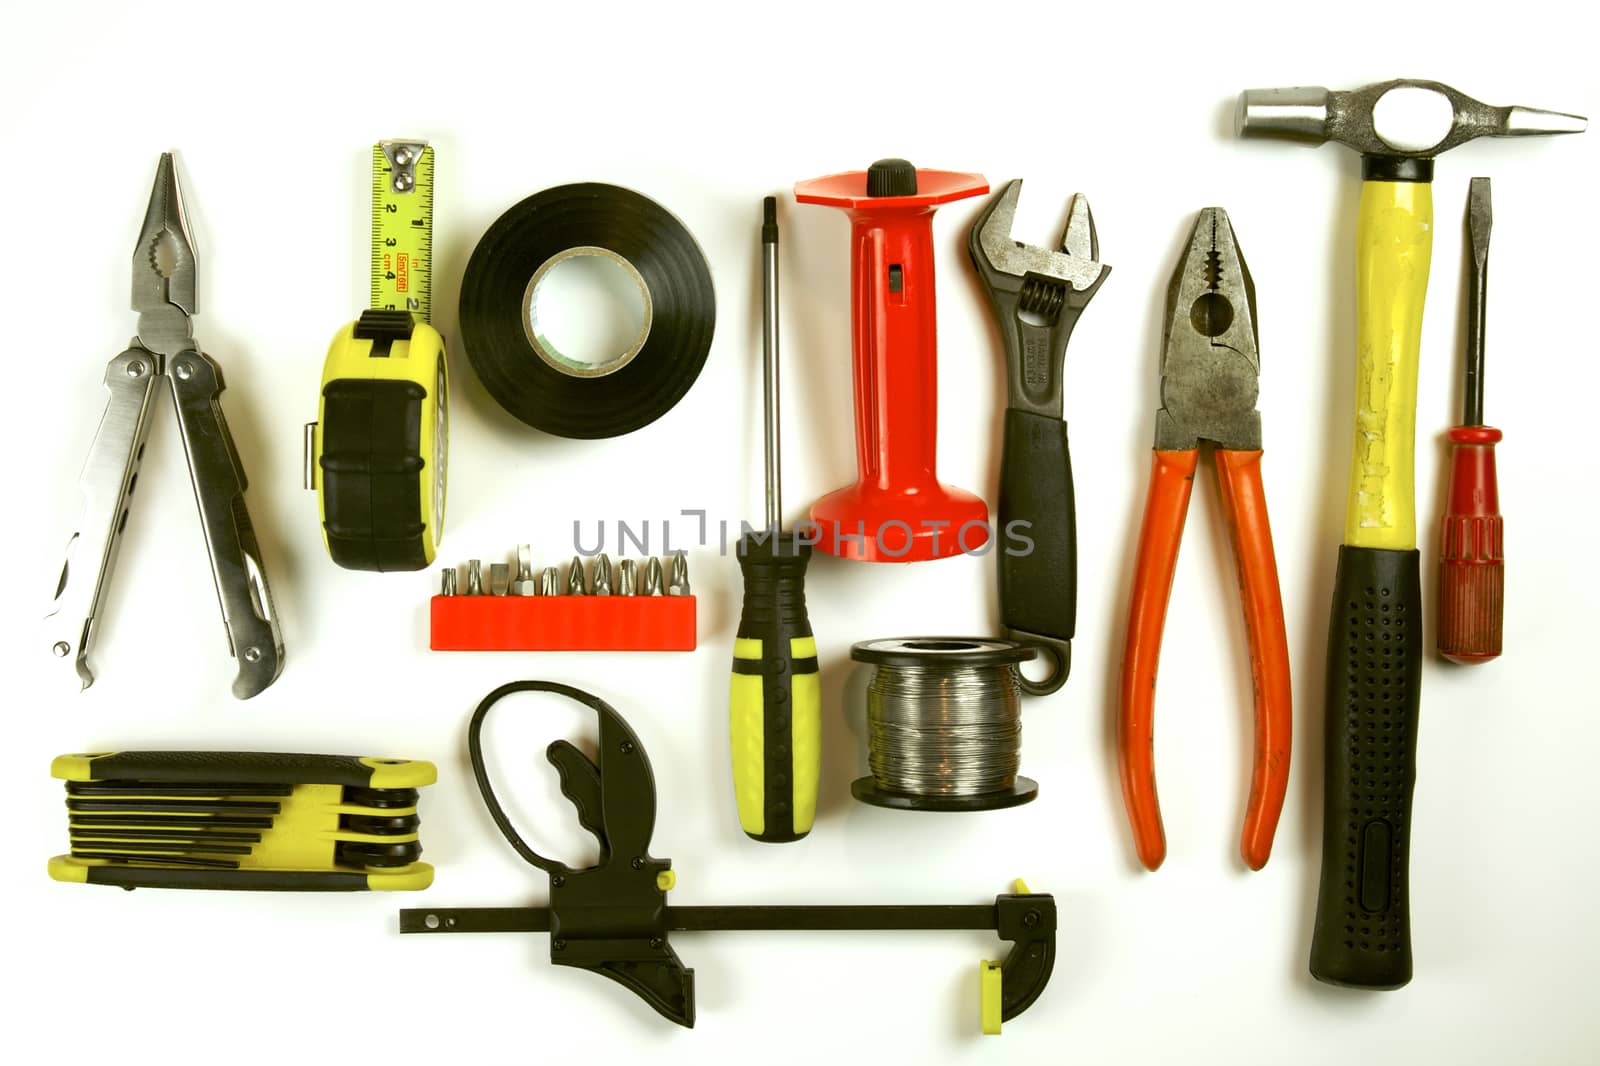 A set of Tools Handyman and Carpentry Isolated on White